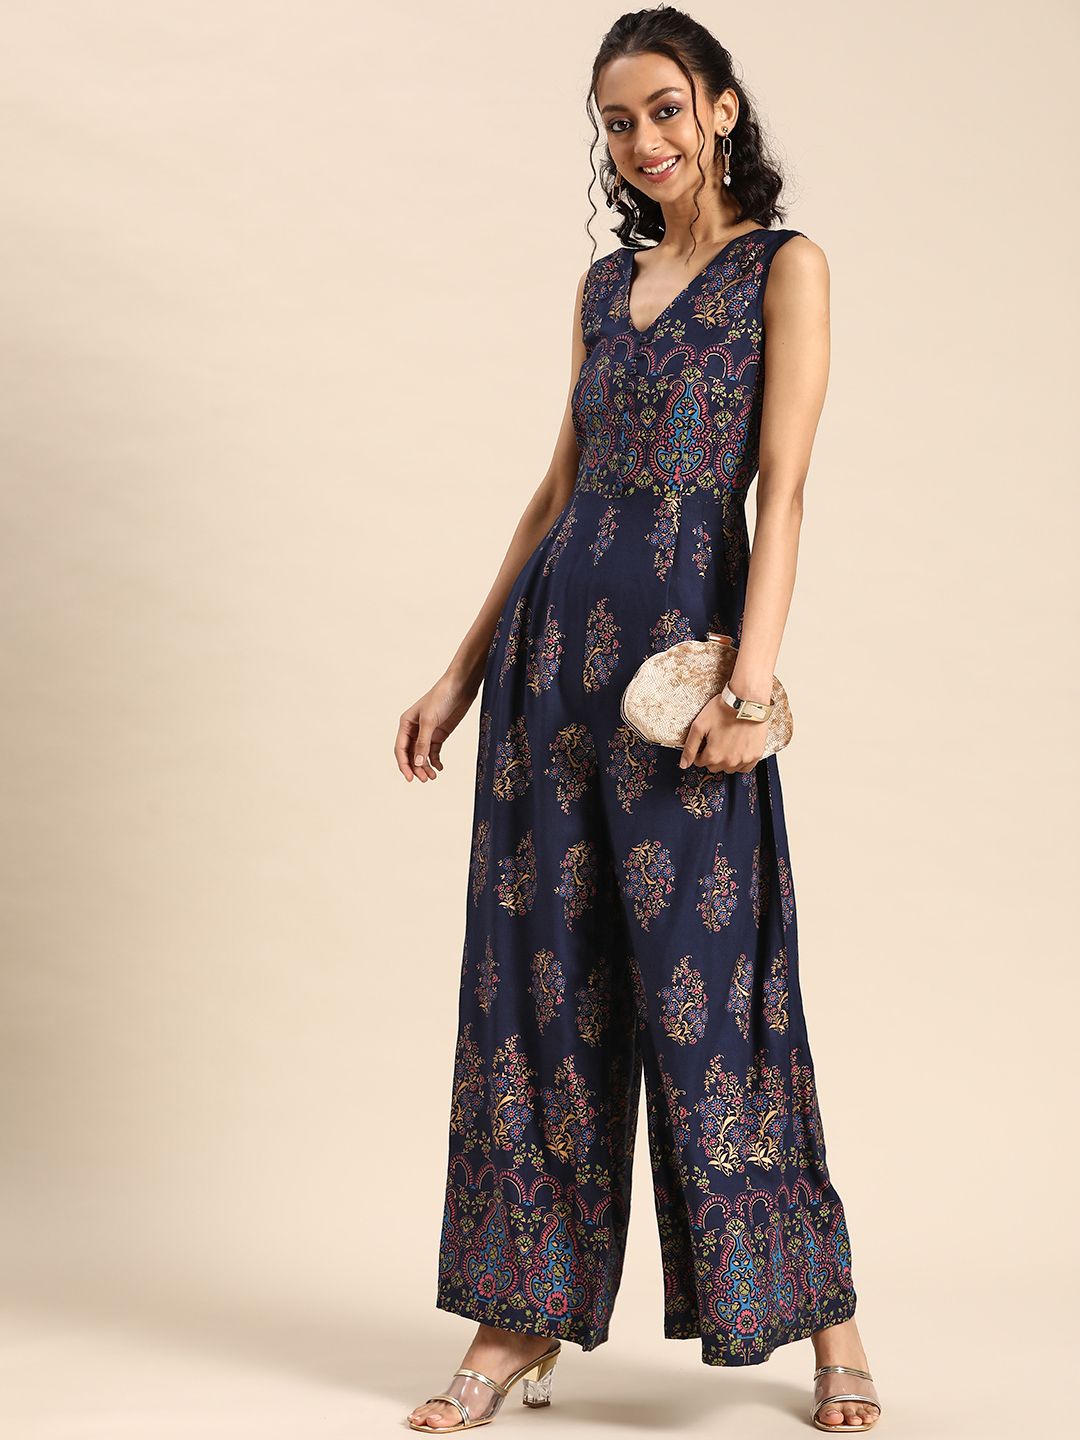 MABISH by Sonal Jain Navy Blue Basic Jumpsuit Price in India